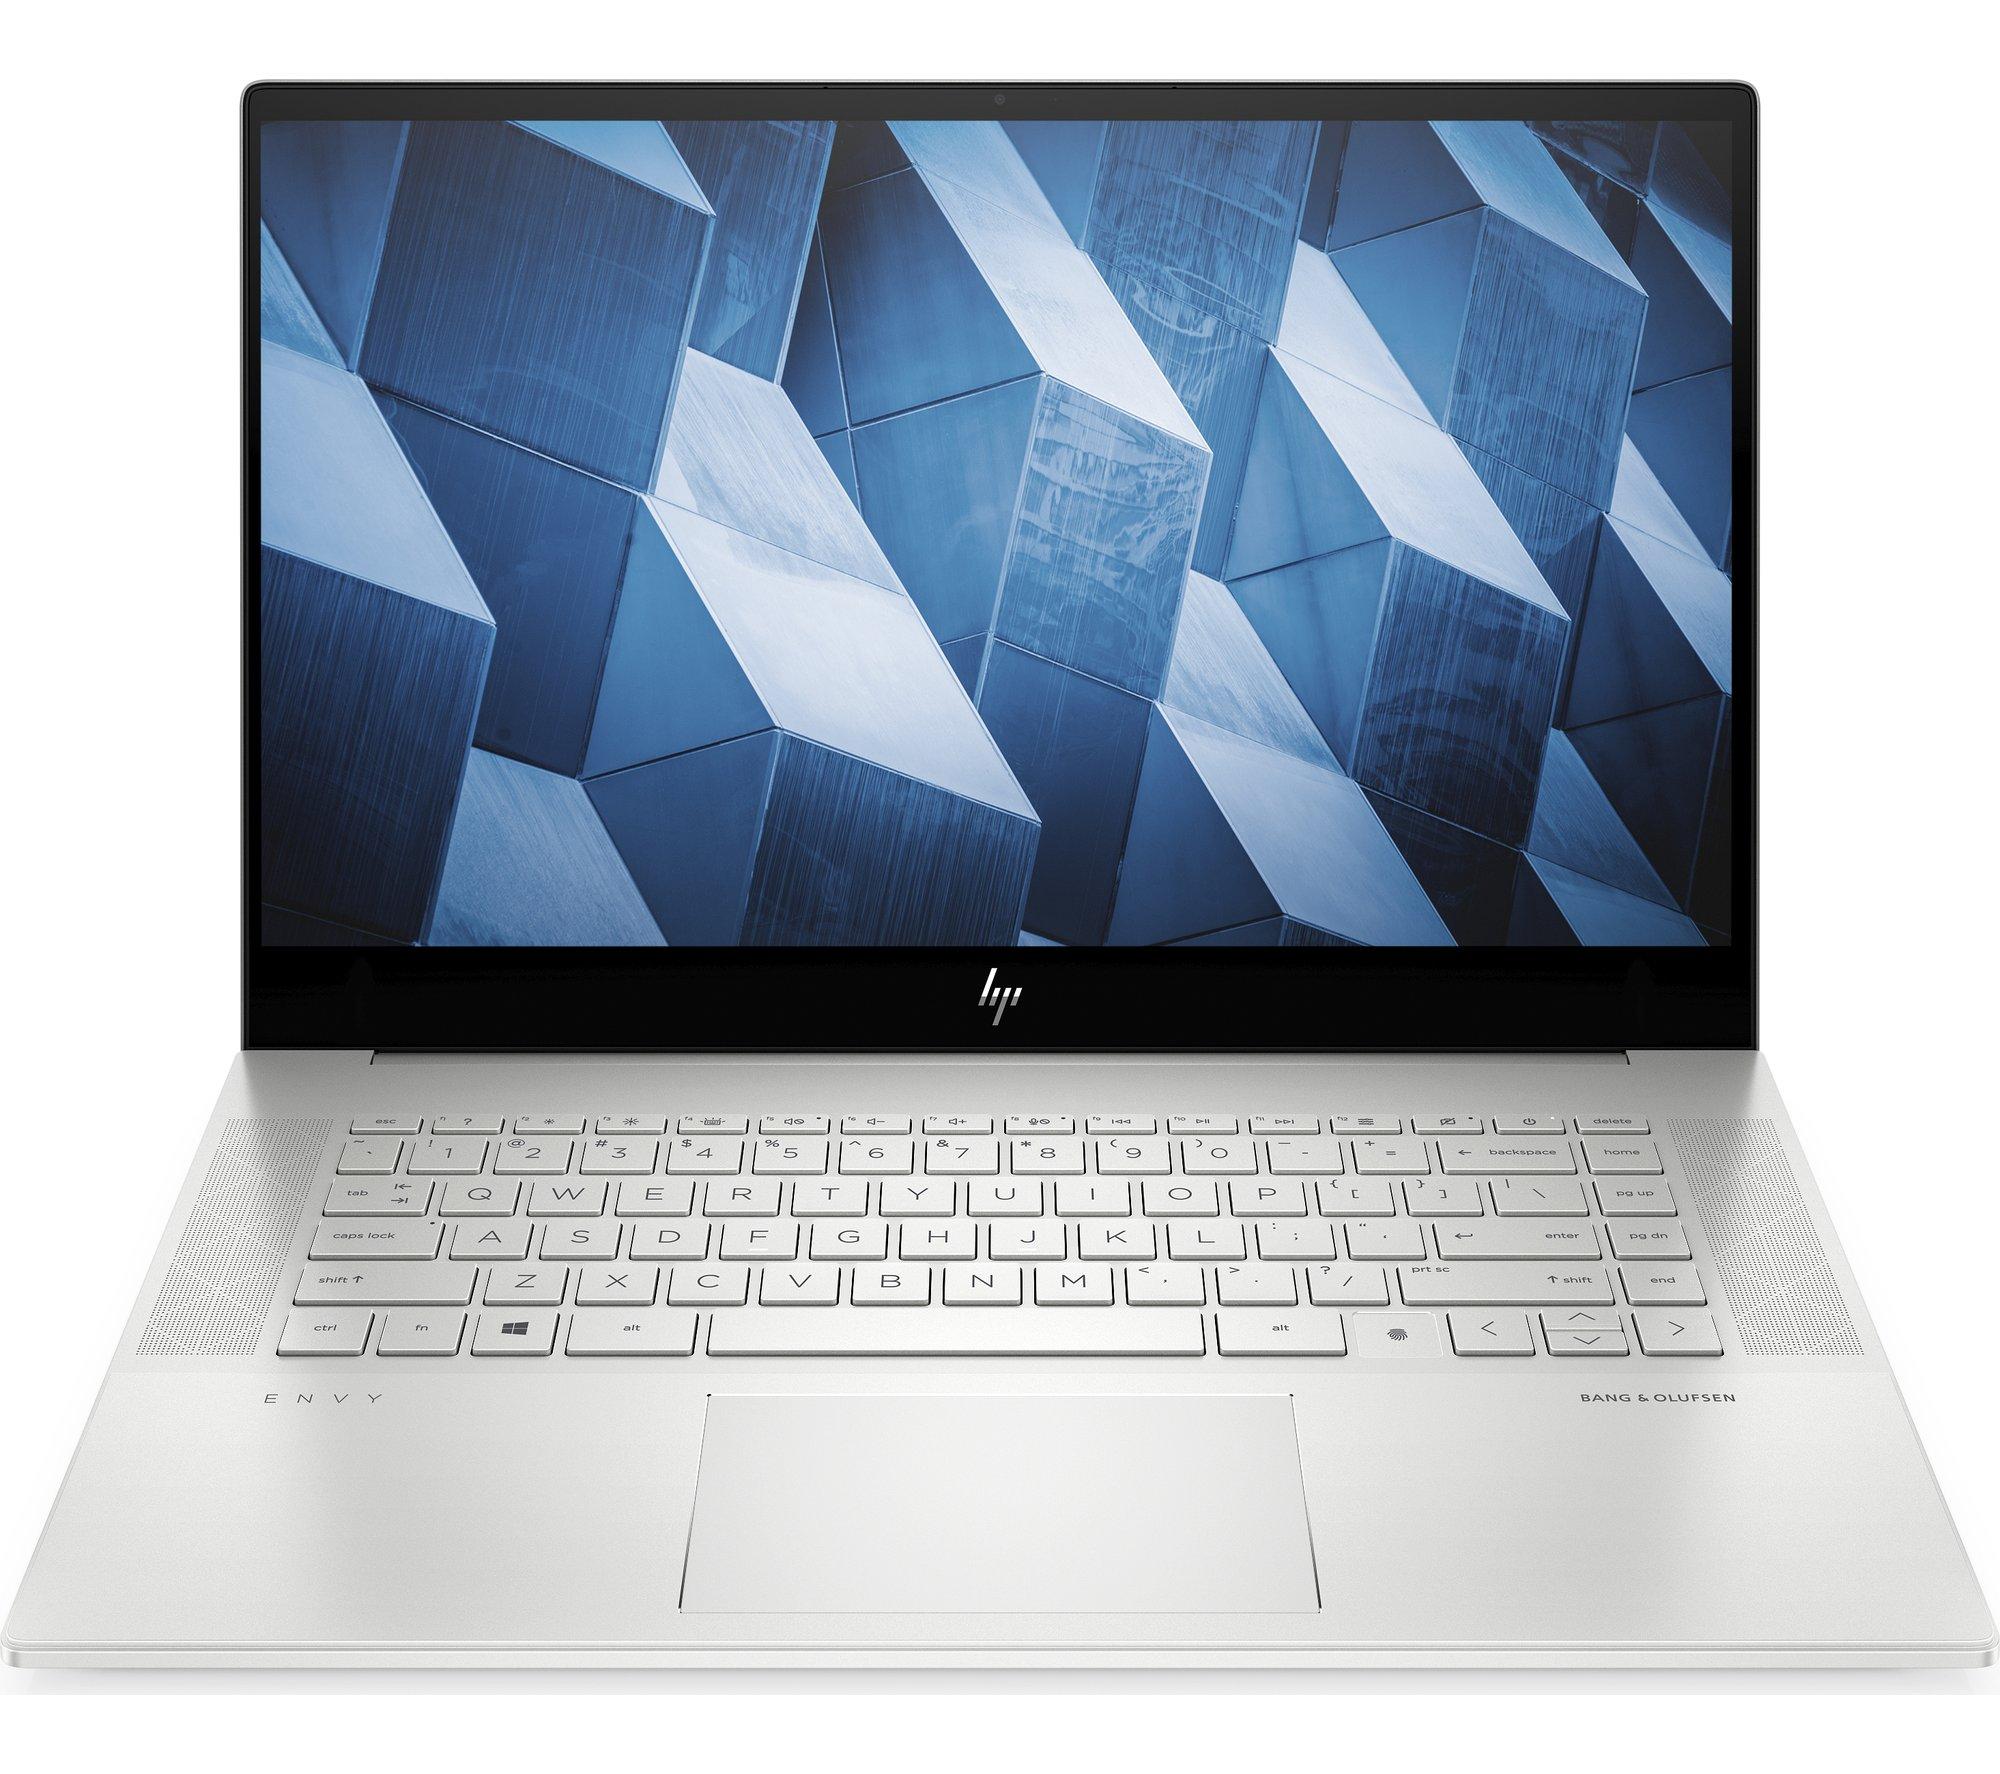 HP ENVY 15-ep1503na 15.6inch Laptop - IntelCore i7  512 GB SSD  Silver  Silver/Grey